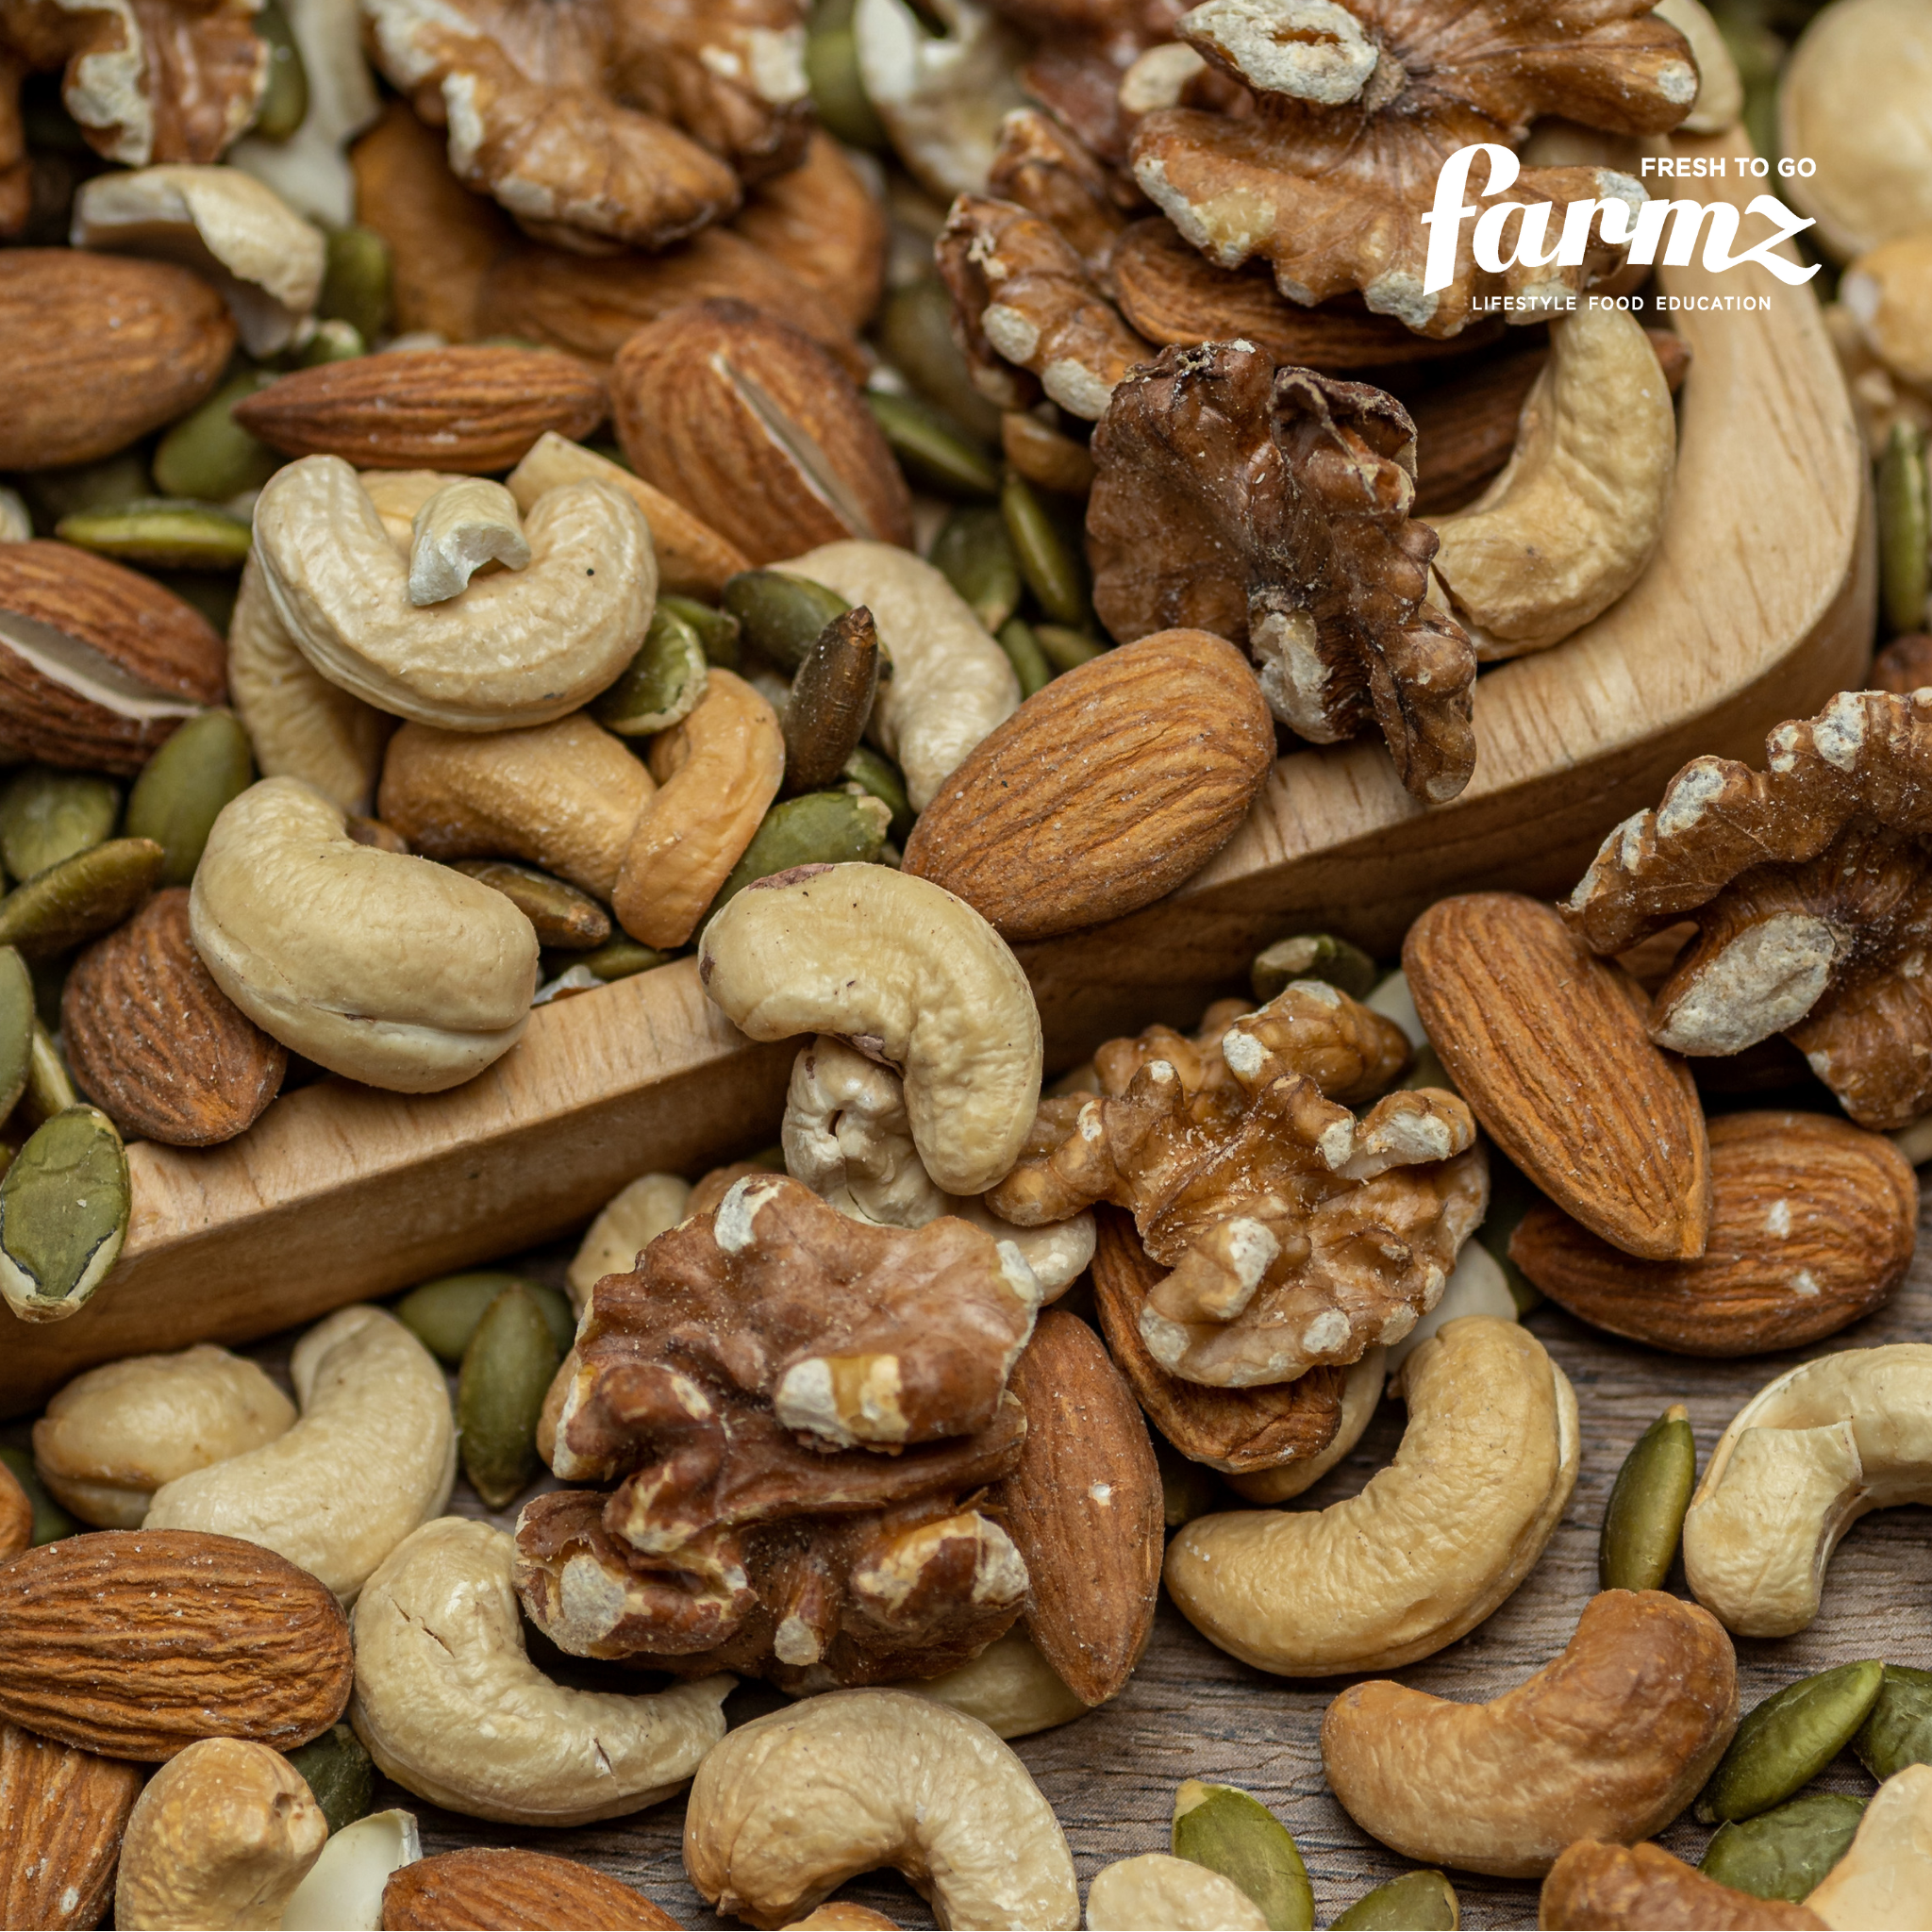 Baked Mixed Nuts, Baked Almonds, Baked Cashew nuts, Baked Walnuts, Baked Pumpkin Seeds, Farmz Asia